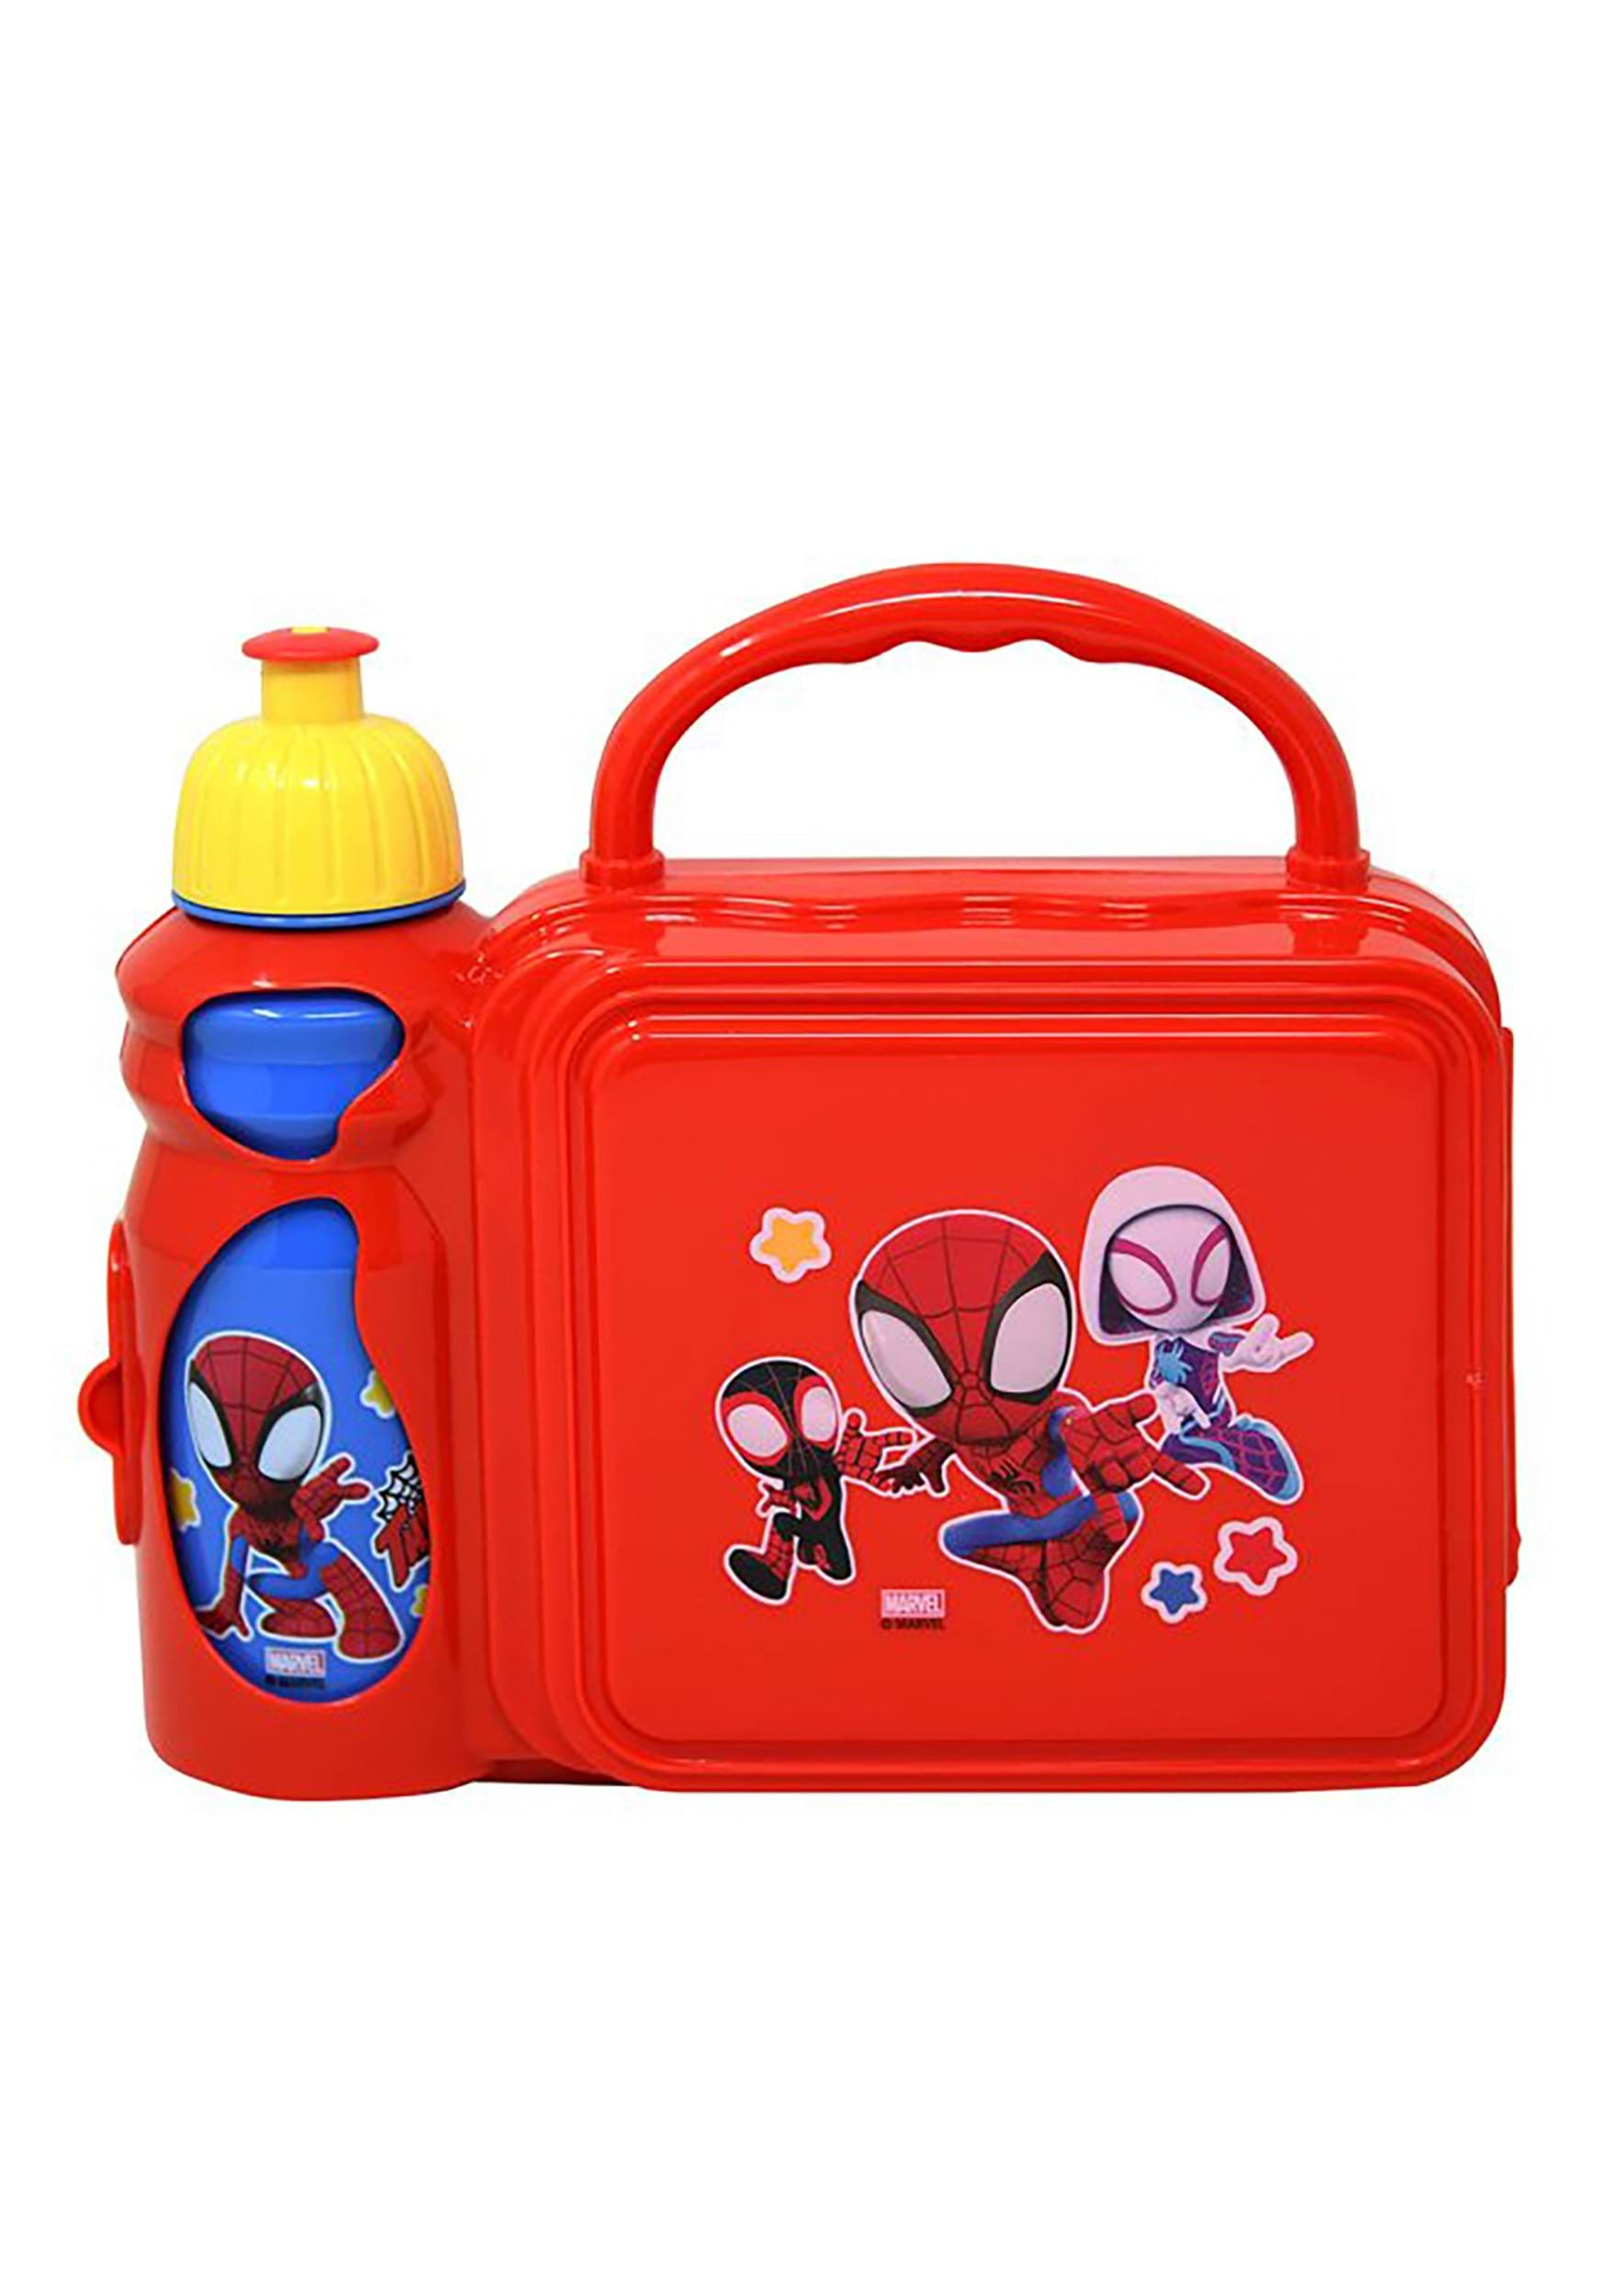 https://images.fun.com/products/83852/1-1/spidey-and-friends-combo-lunch-box-with-water-bottle.jpg